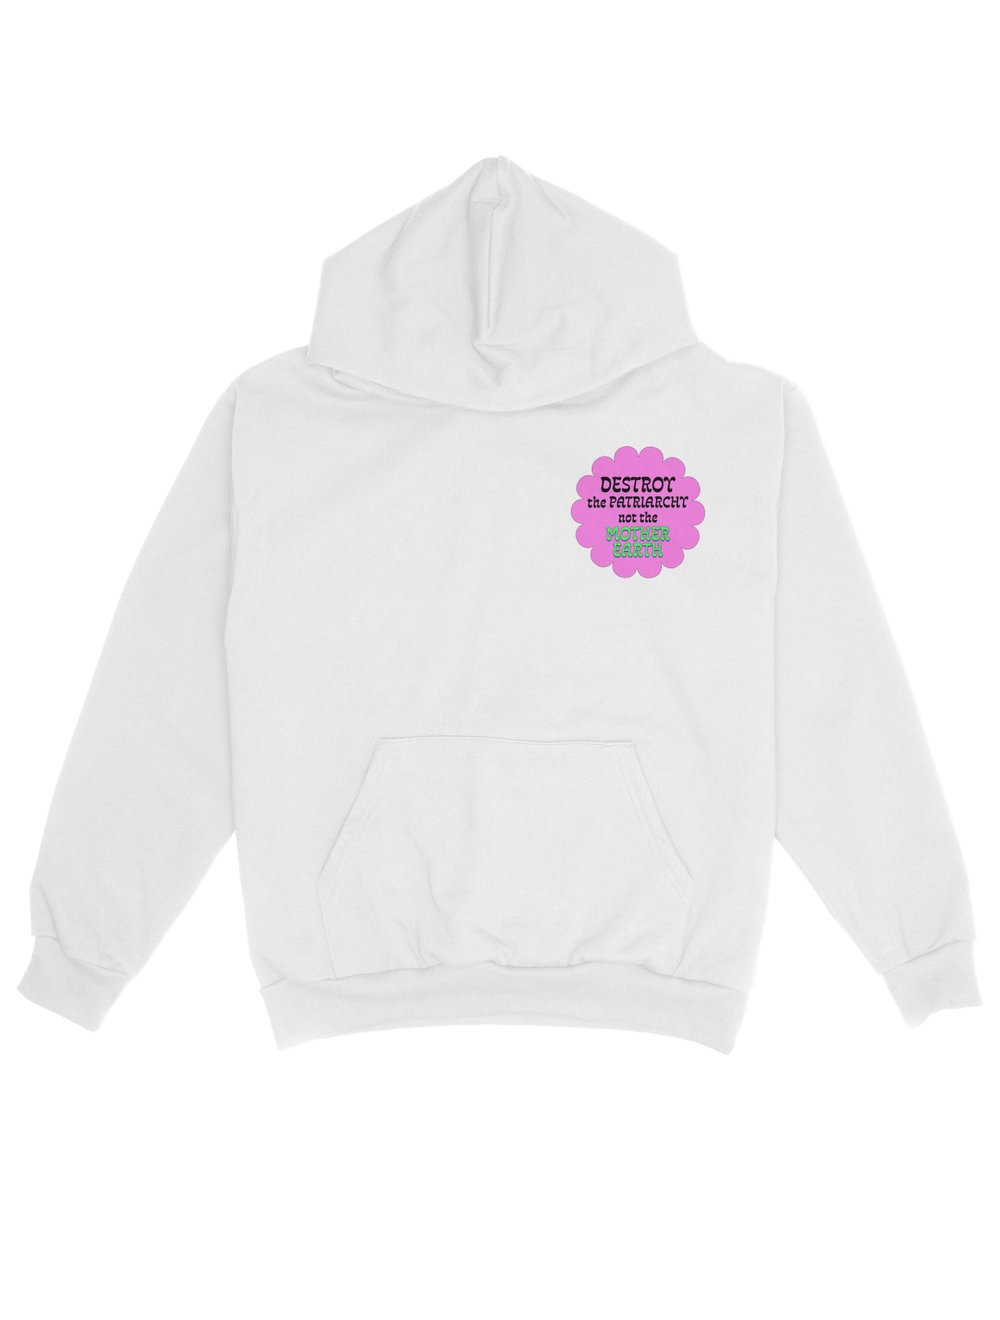 Destroy Patriarchy Not The Mother Earth Hoodie